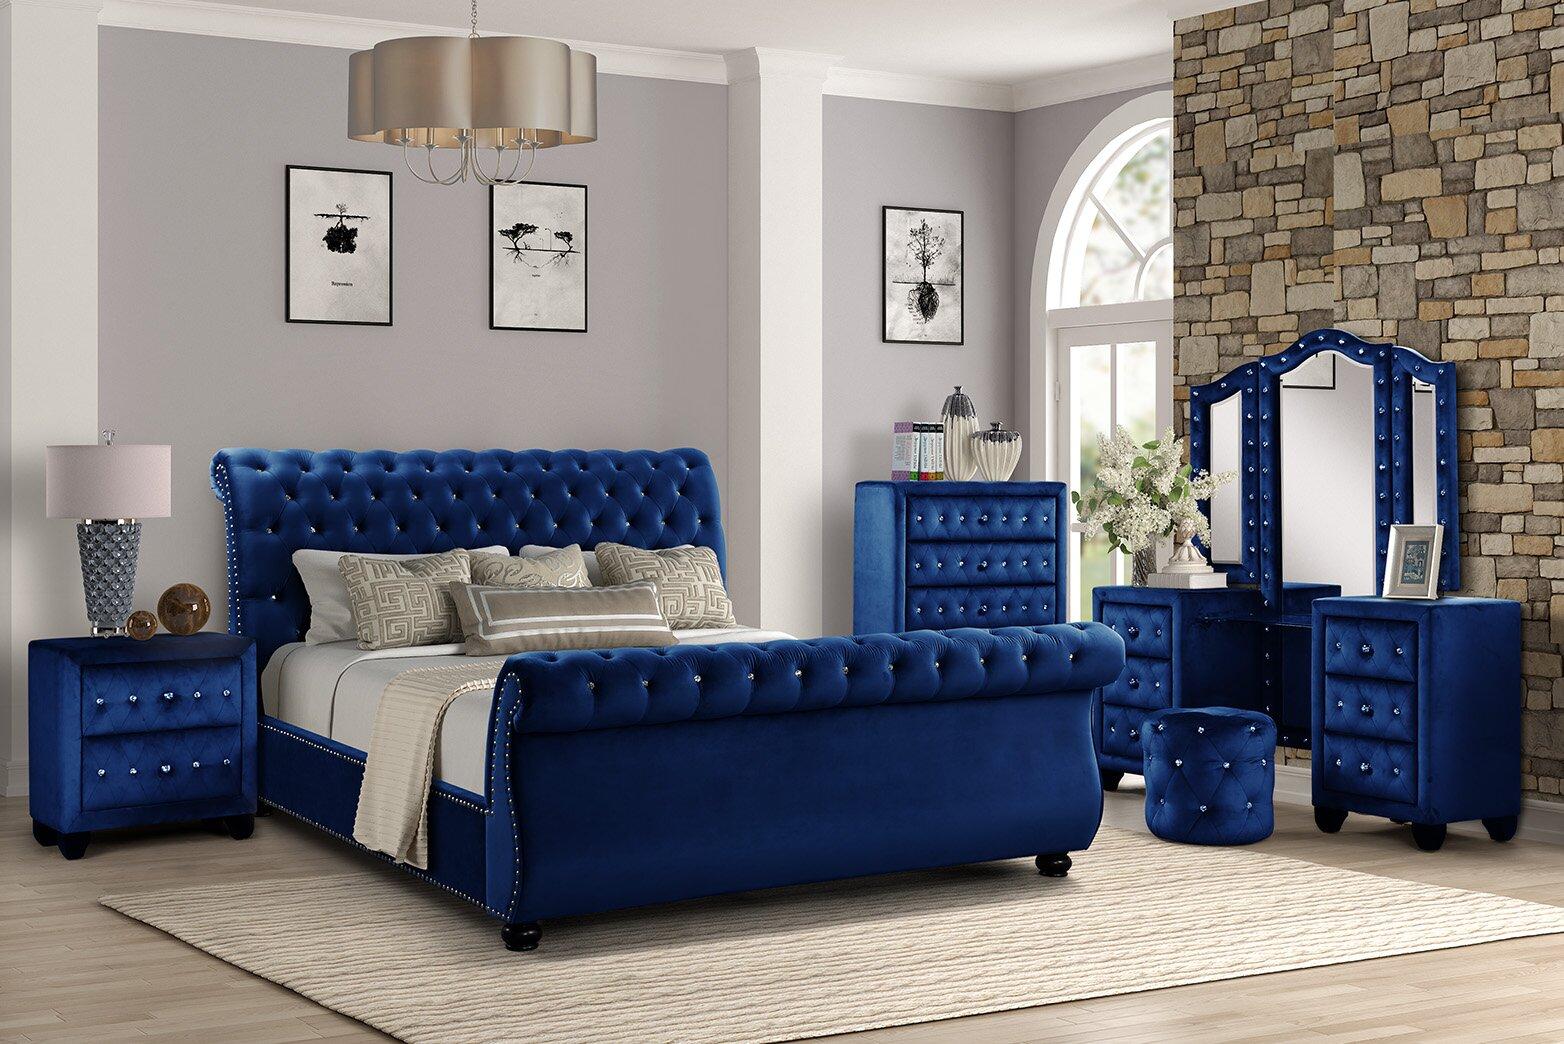 

    
Glam Blue Velvet Queen Bed Set 5Pcs w/VANITY KENDALL Galaxy Home Contemporary
